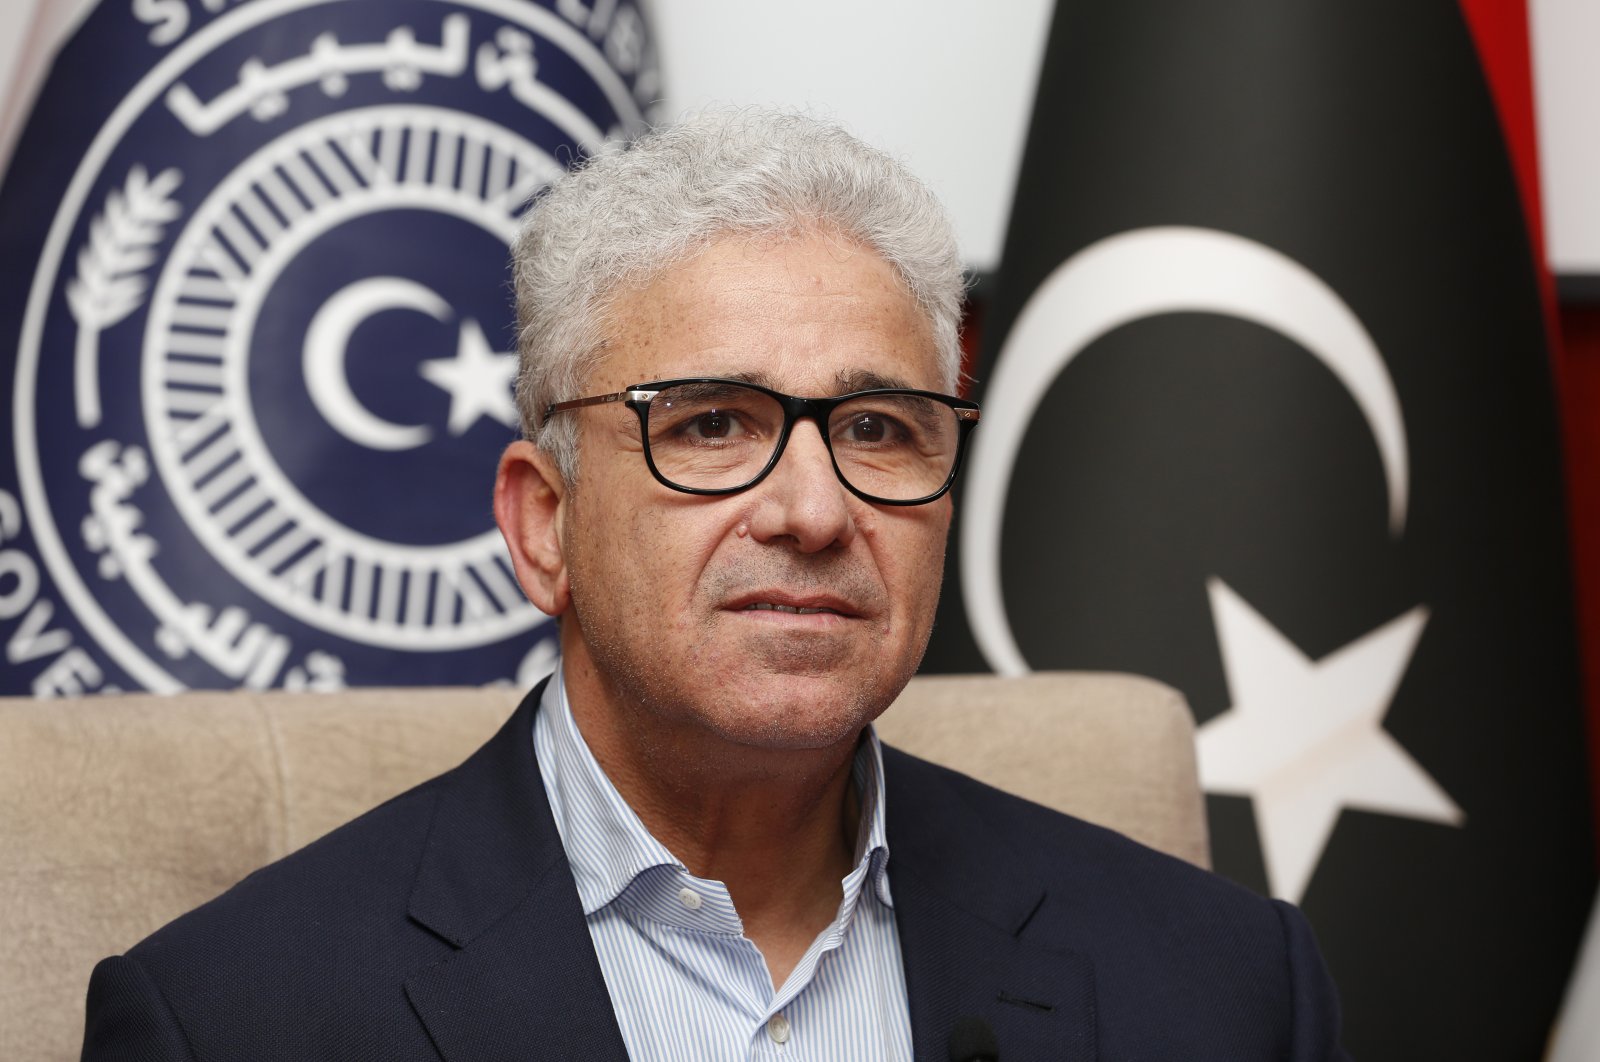 Fathi Bashagha, one of Libya’s rival prime ministers, gives an interview to The Associated Press, in Sirte, Libya, May 25, 2022. (AP Photo)